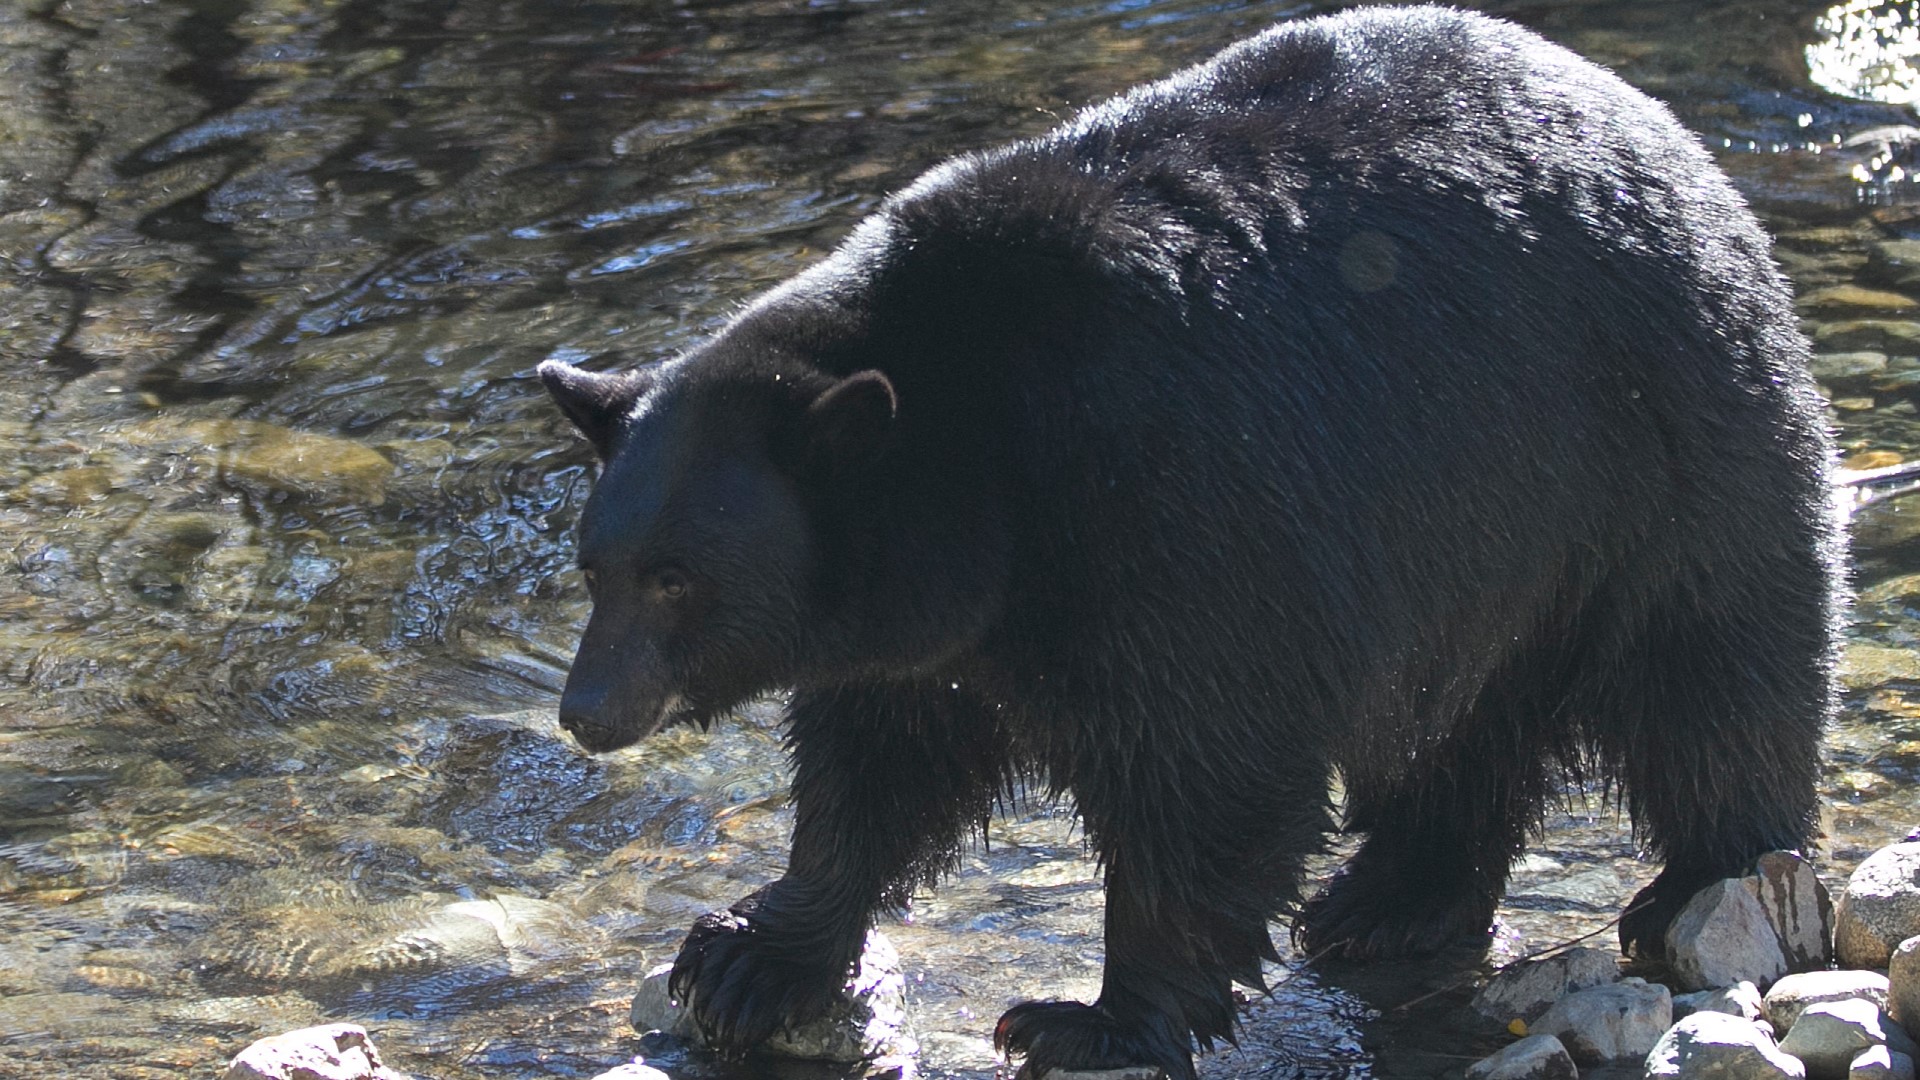 Wildlife officials have swabbed DNA from the victim’s injuries and set traps to catch the bear to potentially euthanize it.